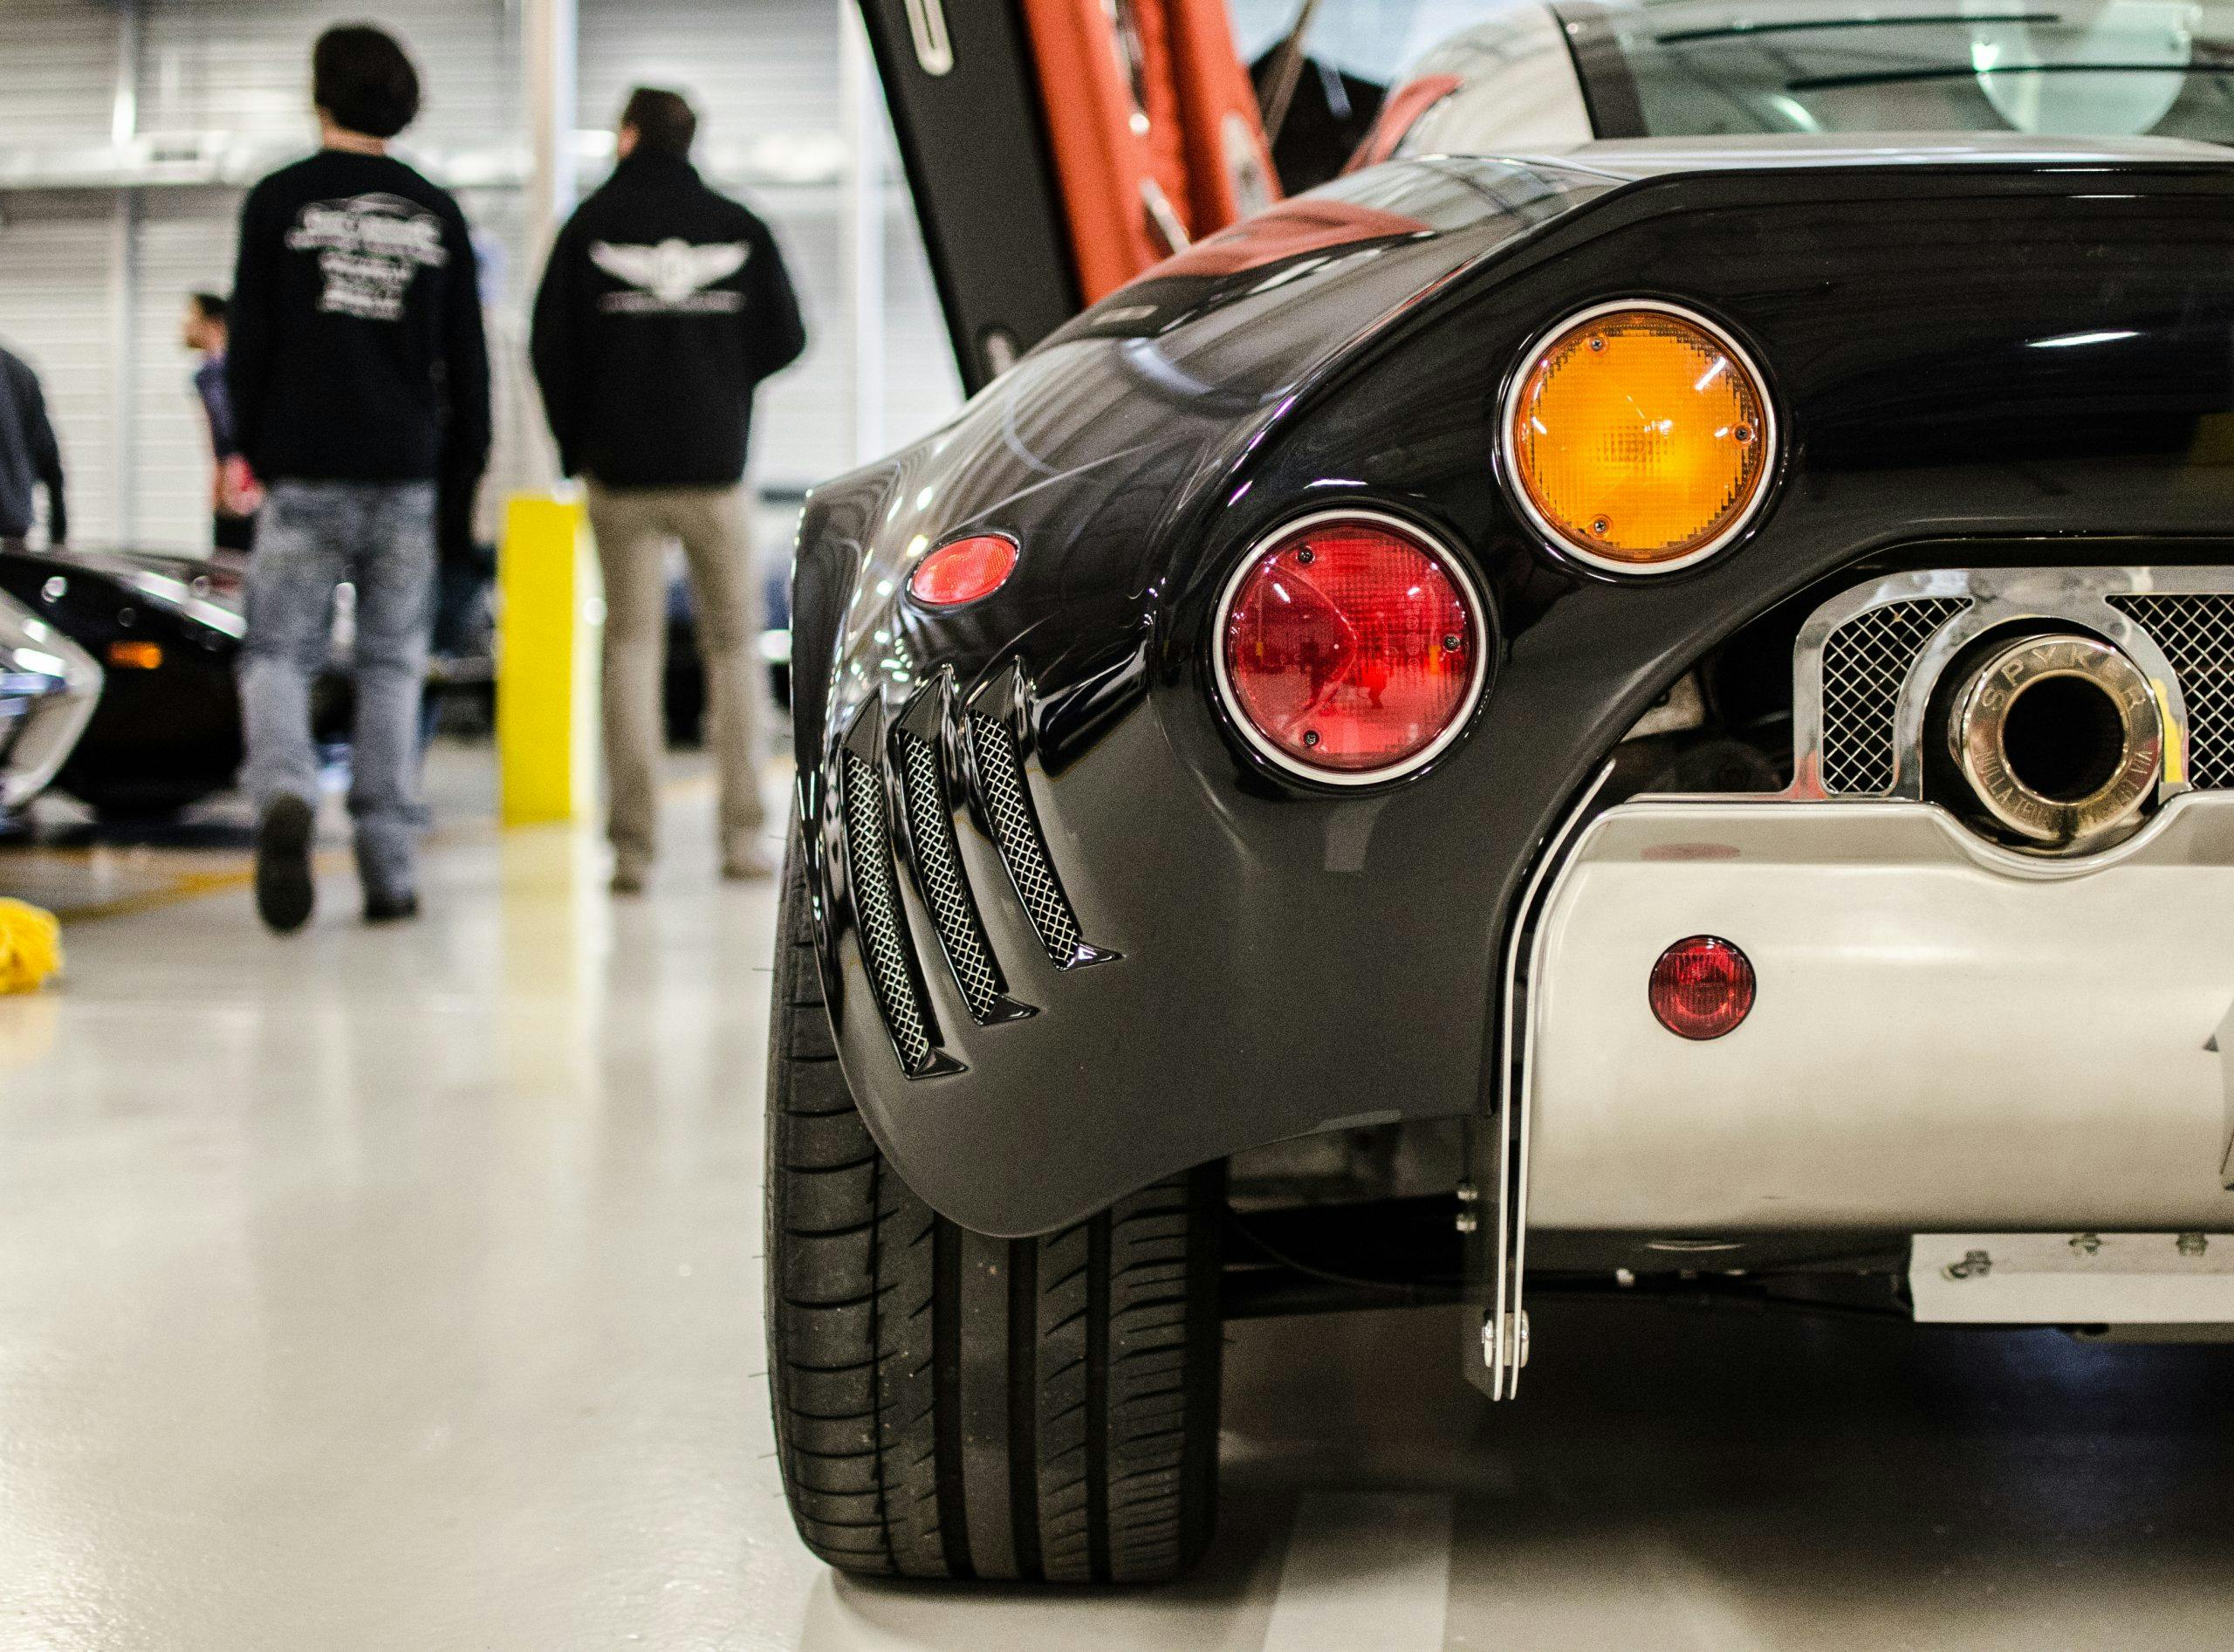 Hagerty G + S Spyker taillight